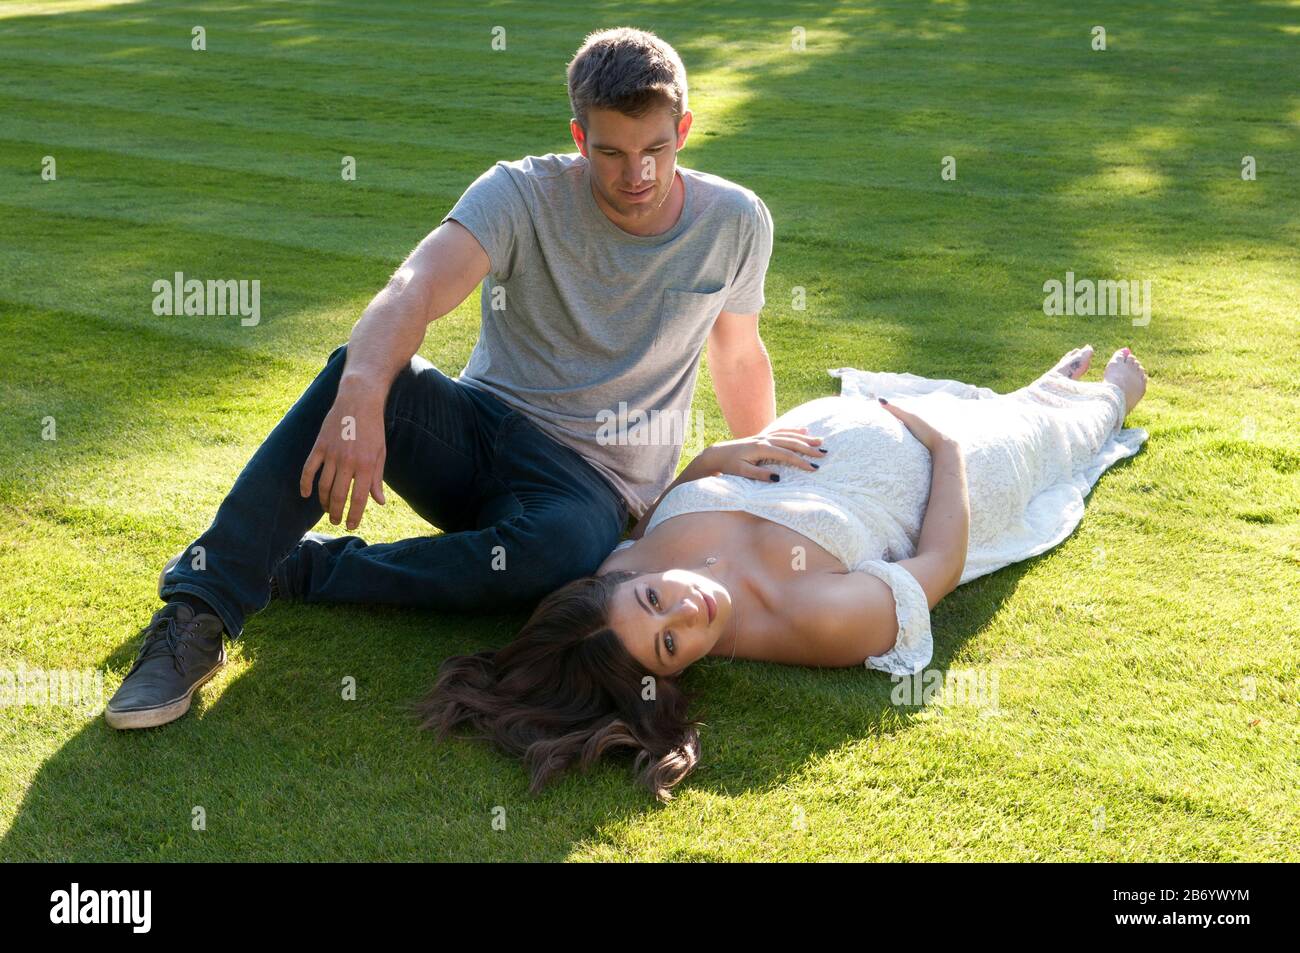 Beautiful pregnant young woman, wearing long white dress, lying down on the grass with her partner sitting next to her Stock Photo